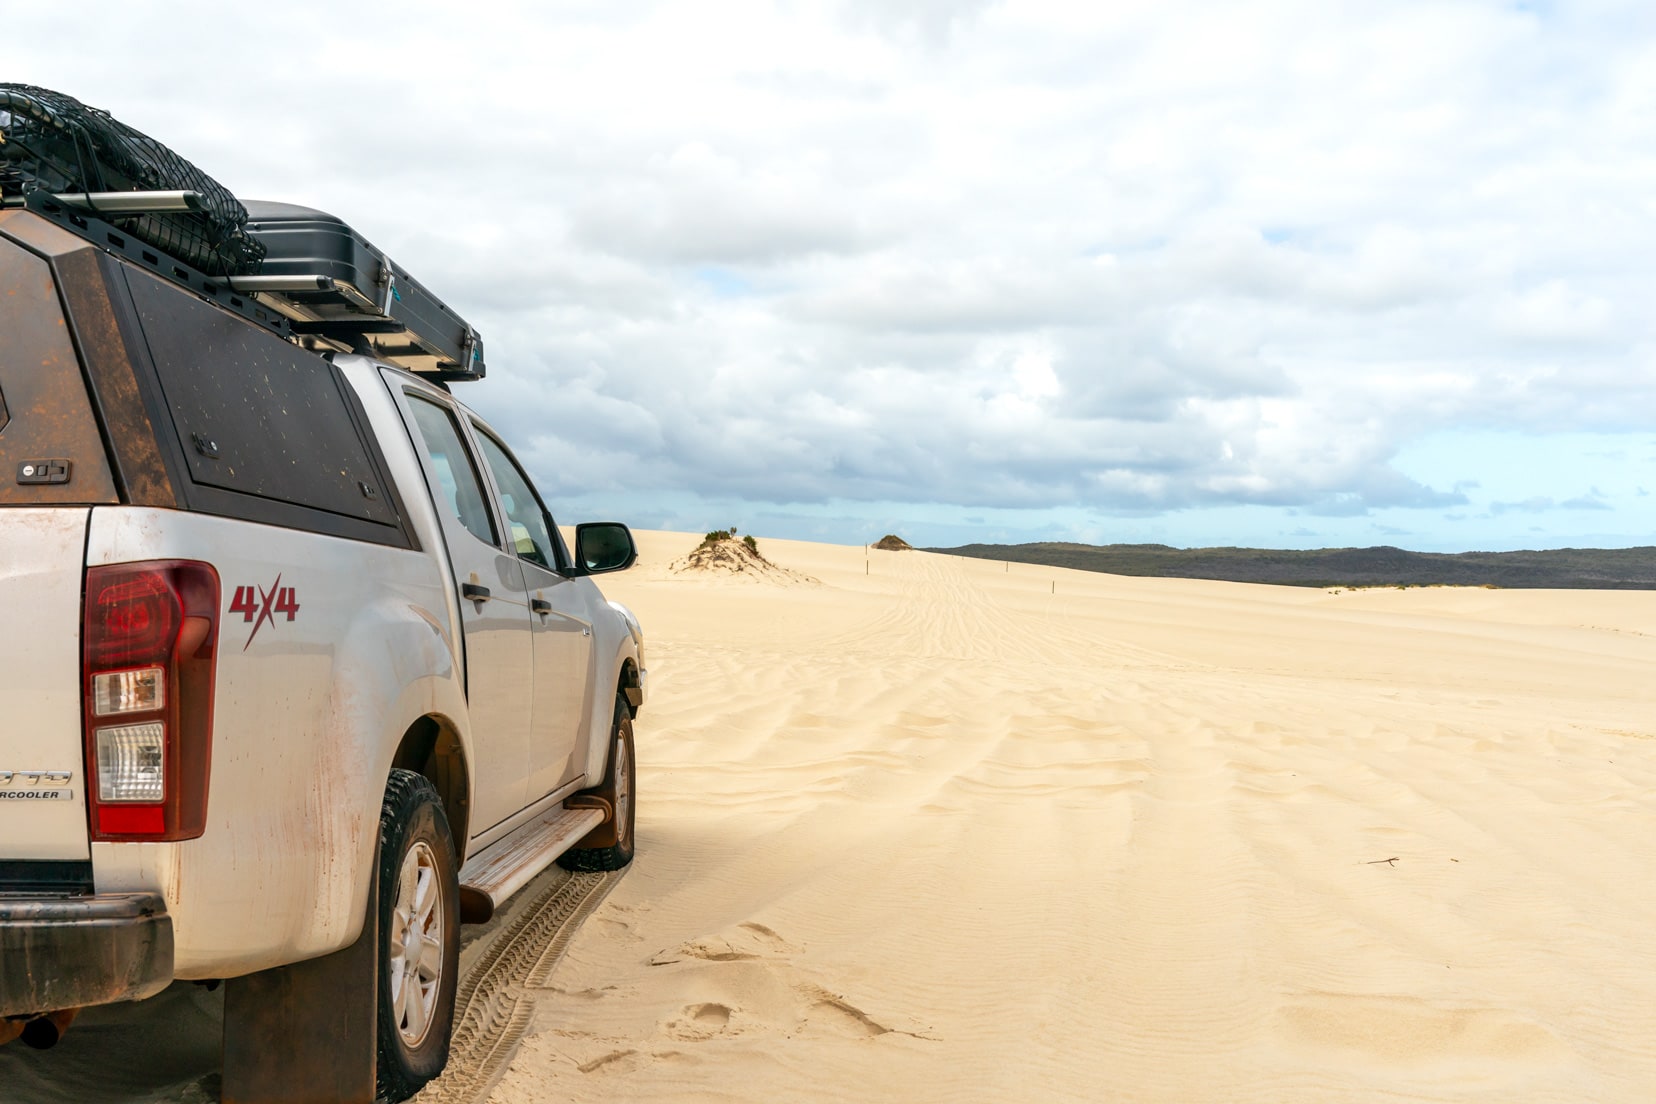 The side of our car on the left of the image and on a huge sand dune